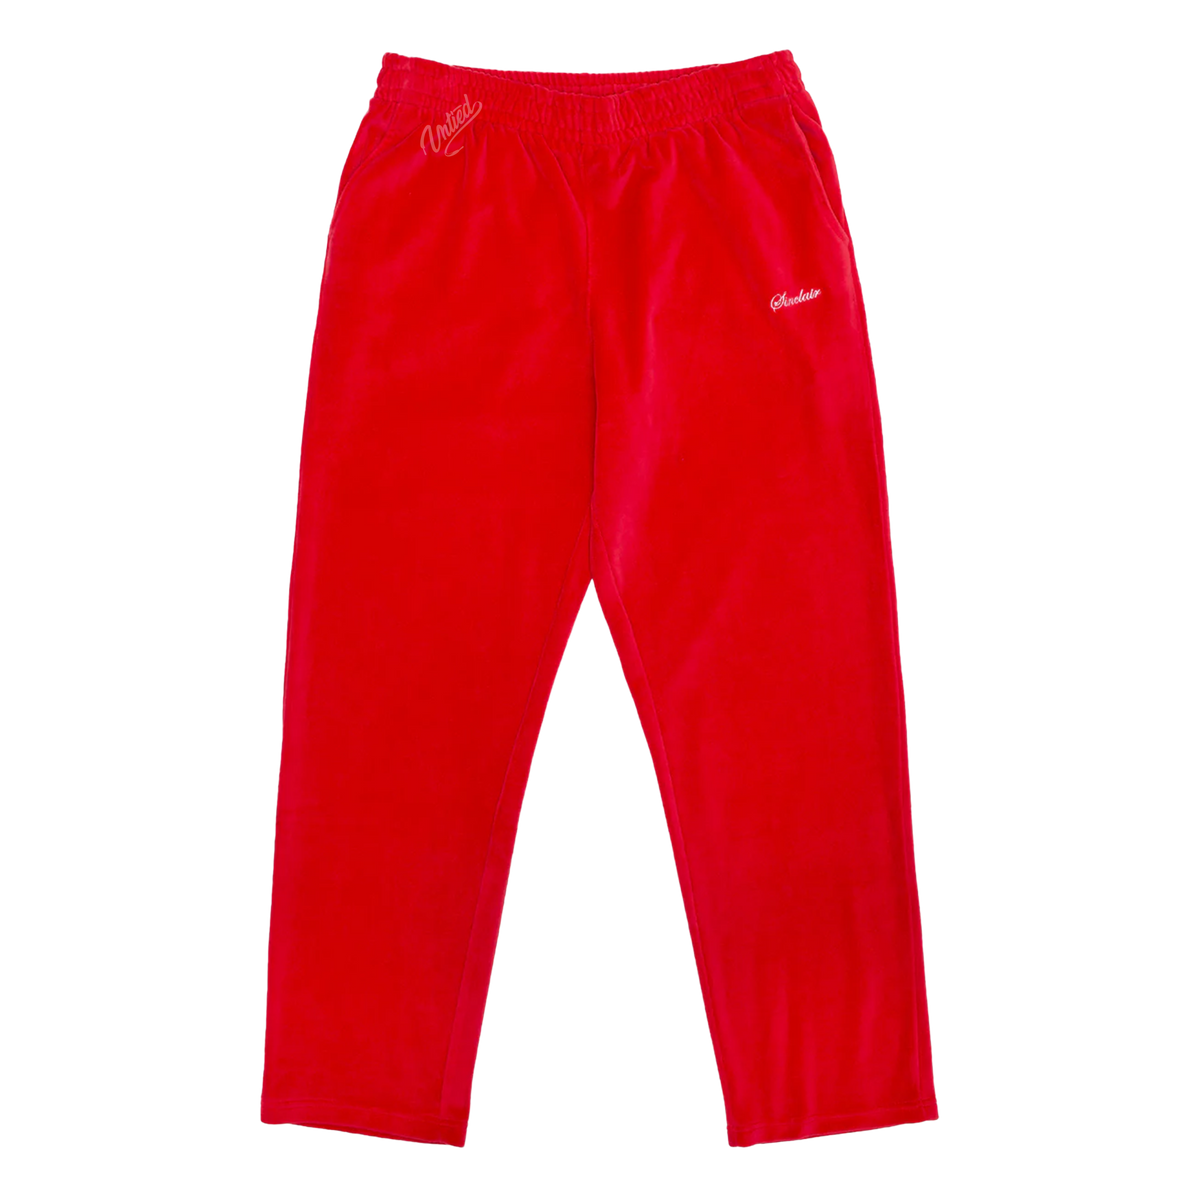 Sinclair Velour Easy Pants "Red"